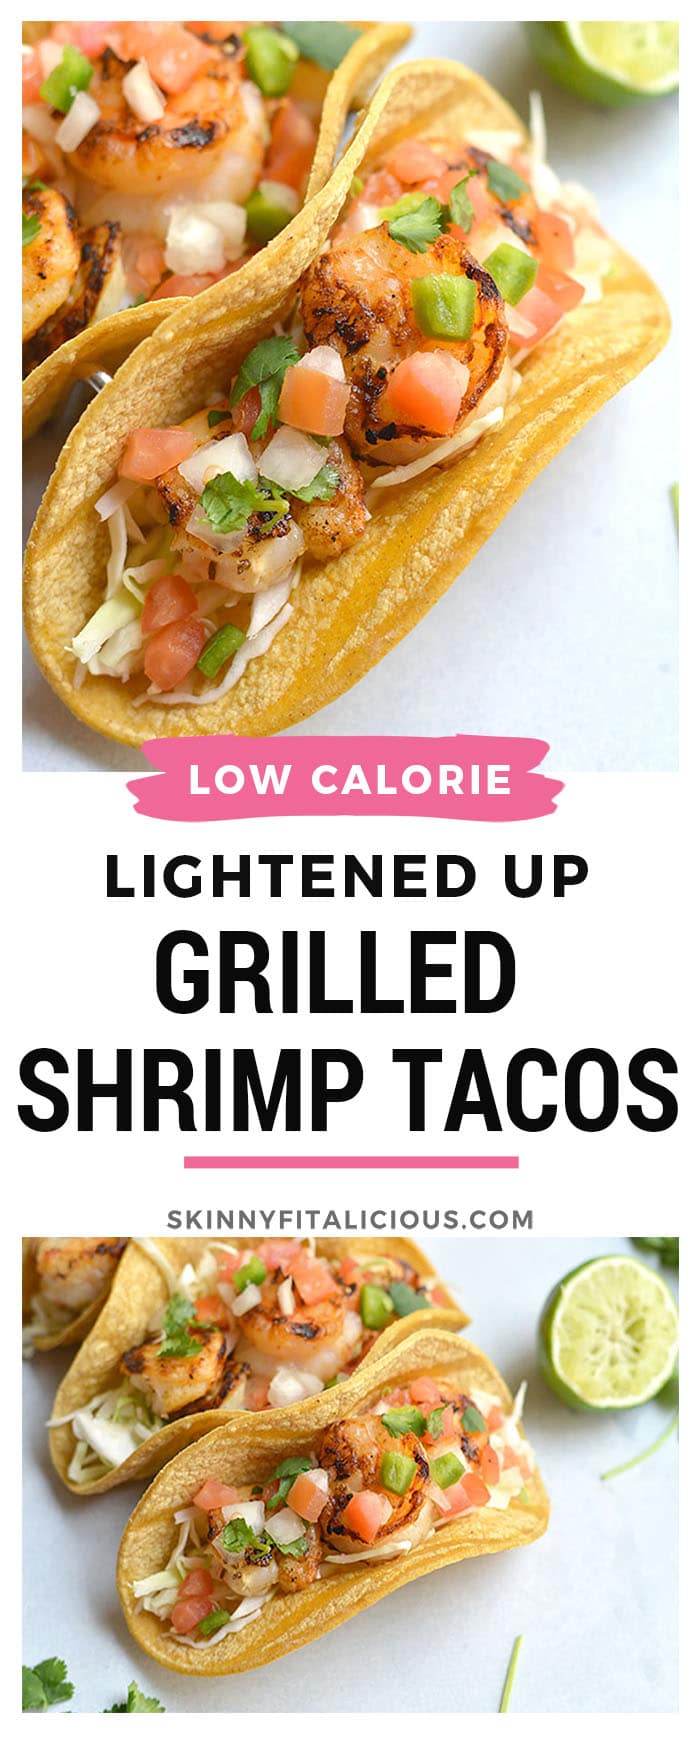 10 Minute Grilled Shrimp Tacos! This lightened up recipe shows you how to do tacos healthier and in a breeze. Grilling shrimp produces delicious flavor and can be easily done with a grill pan. A healthy dinner for busy weeknights or weekend BBQ's! Gluten Free + Low Calorie with a Paleo option